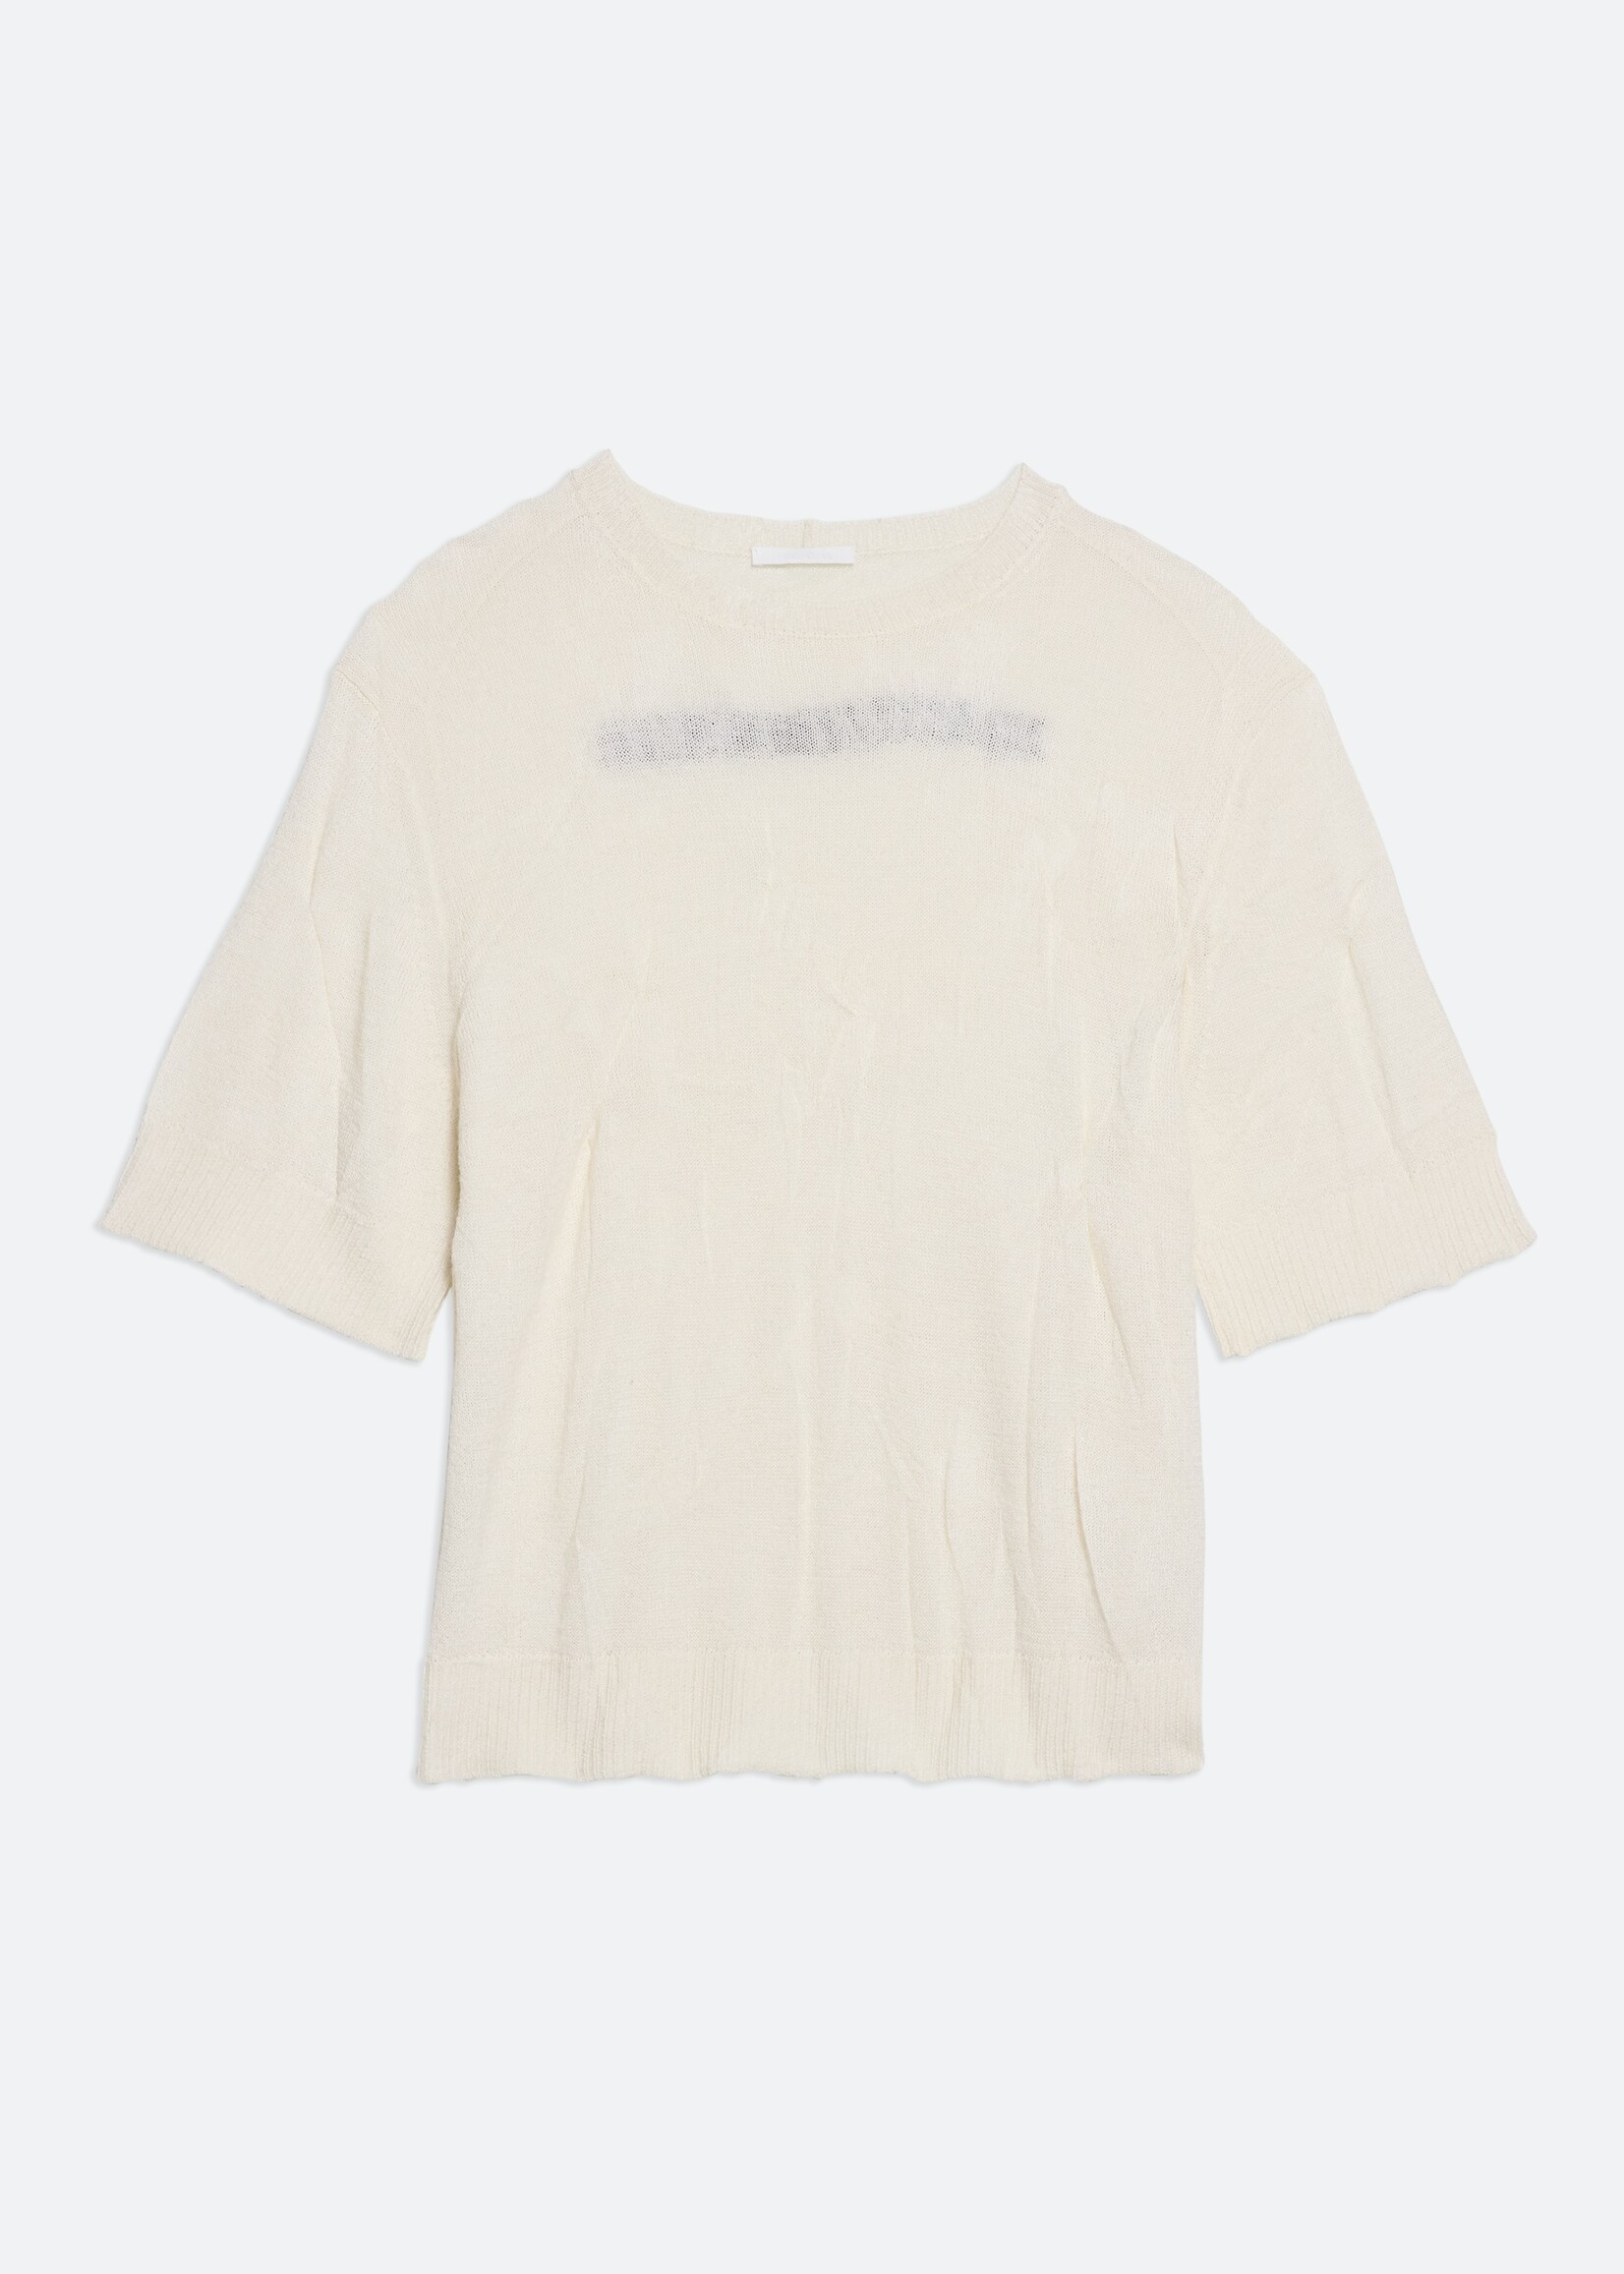 HELMUT LANG BY PETER DO Crushed Knit Tee in Ivory